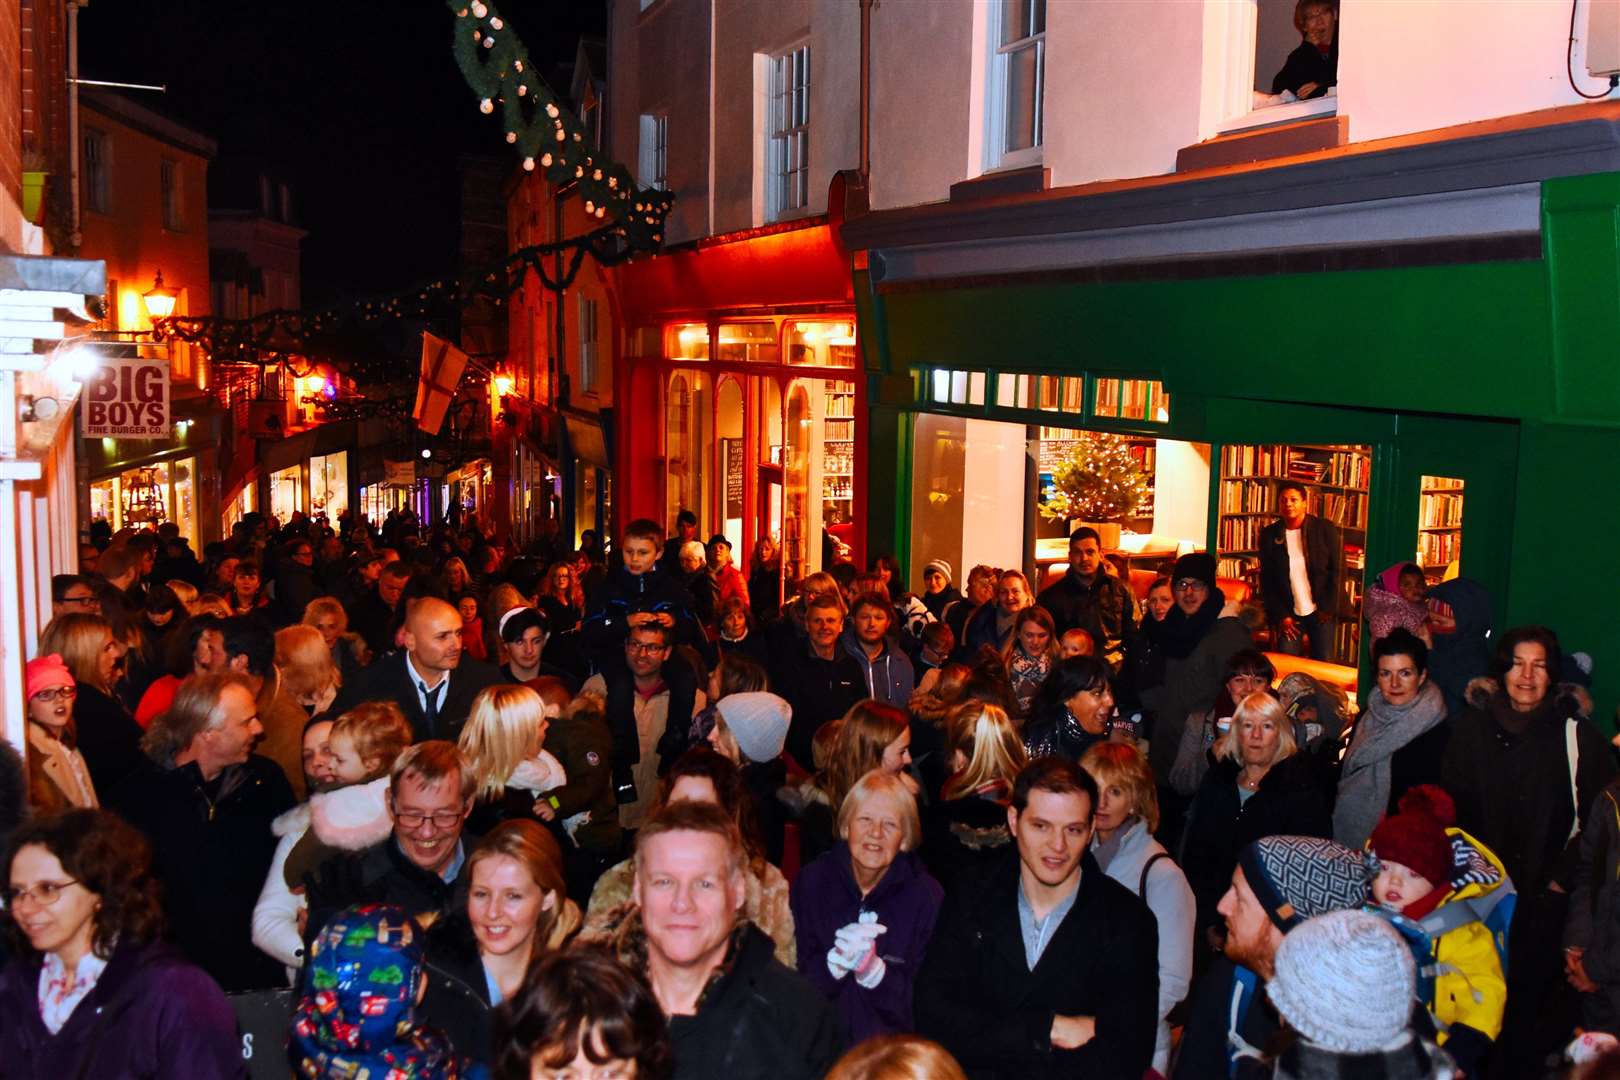 There is lots going on in Folkestone's Creative Quarter this festive season